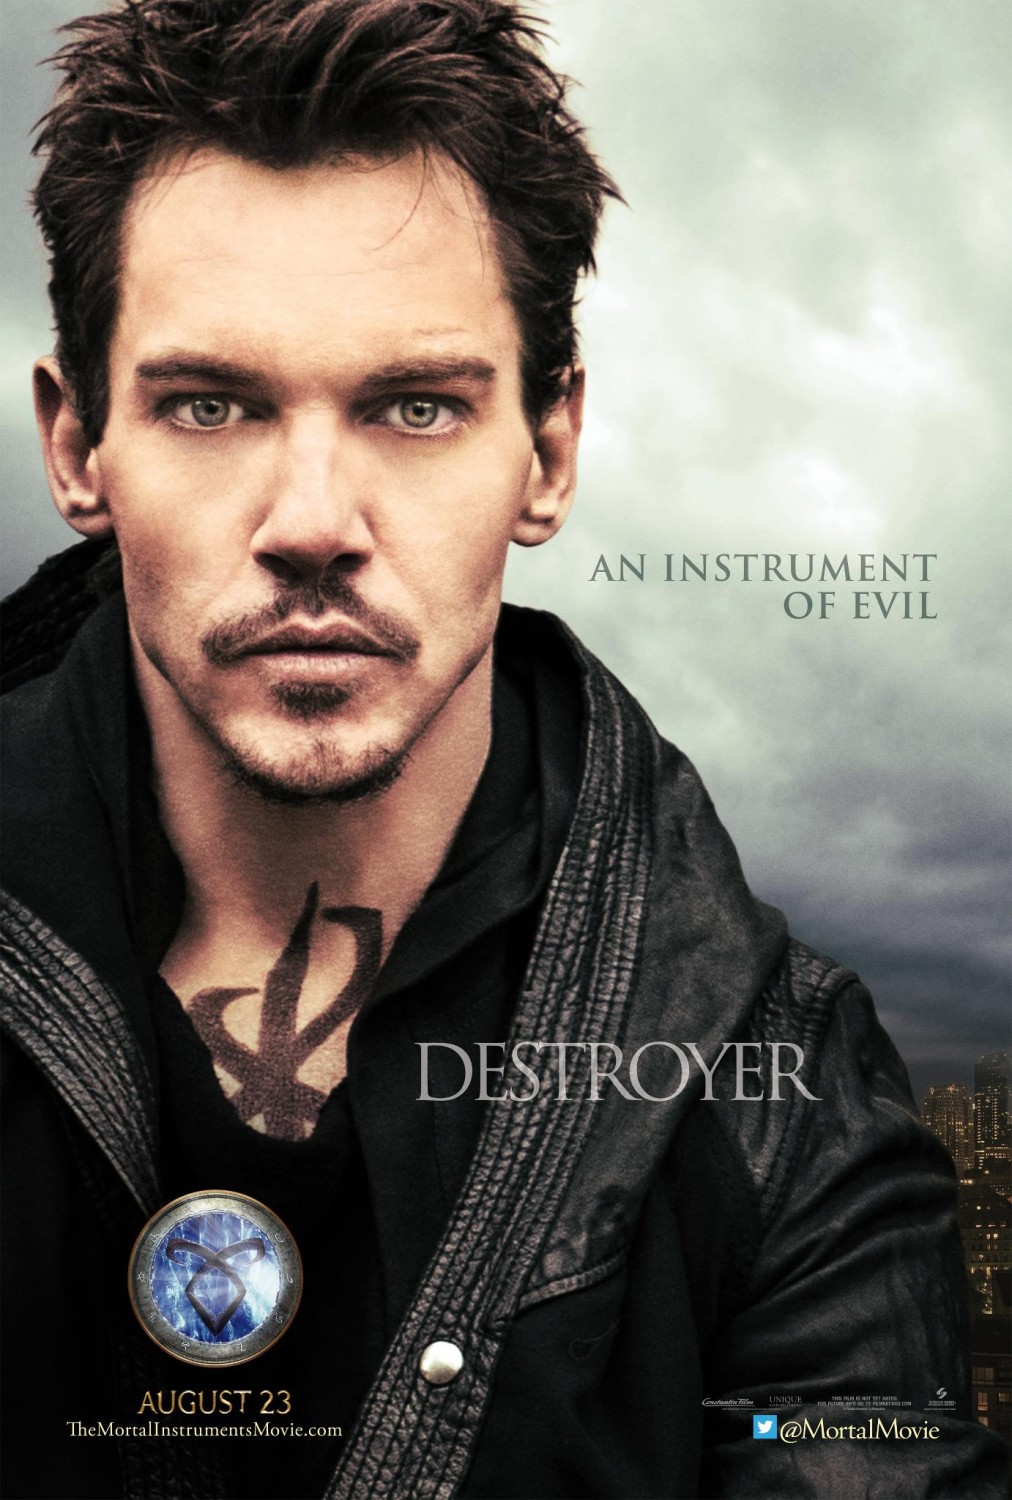 Extra Large Movie Poster Image for The Mortal Instruments: City of Bones (#6 of 15)